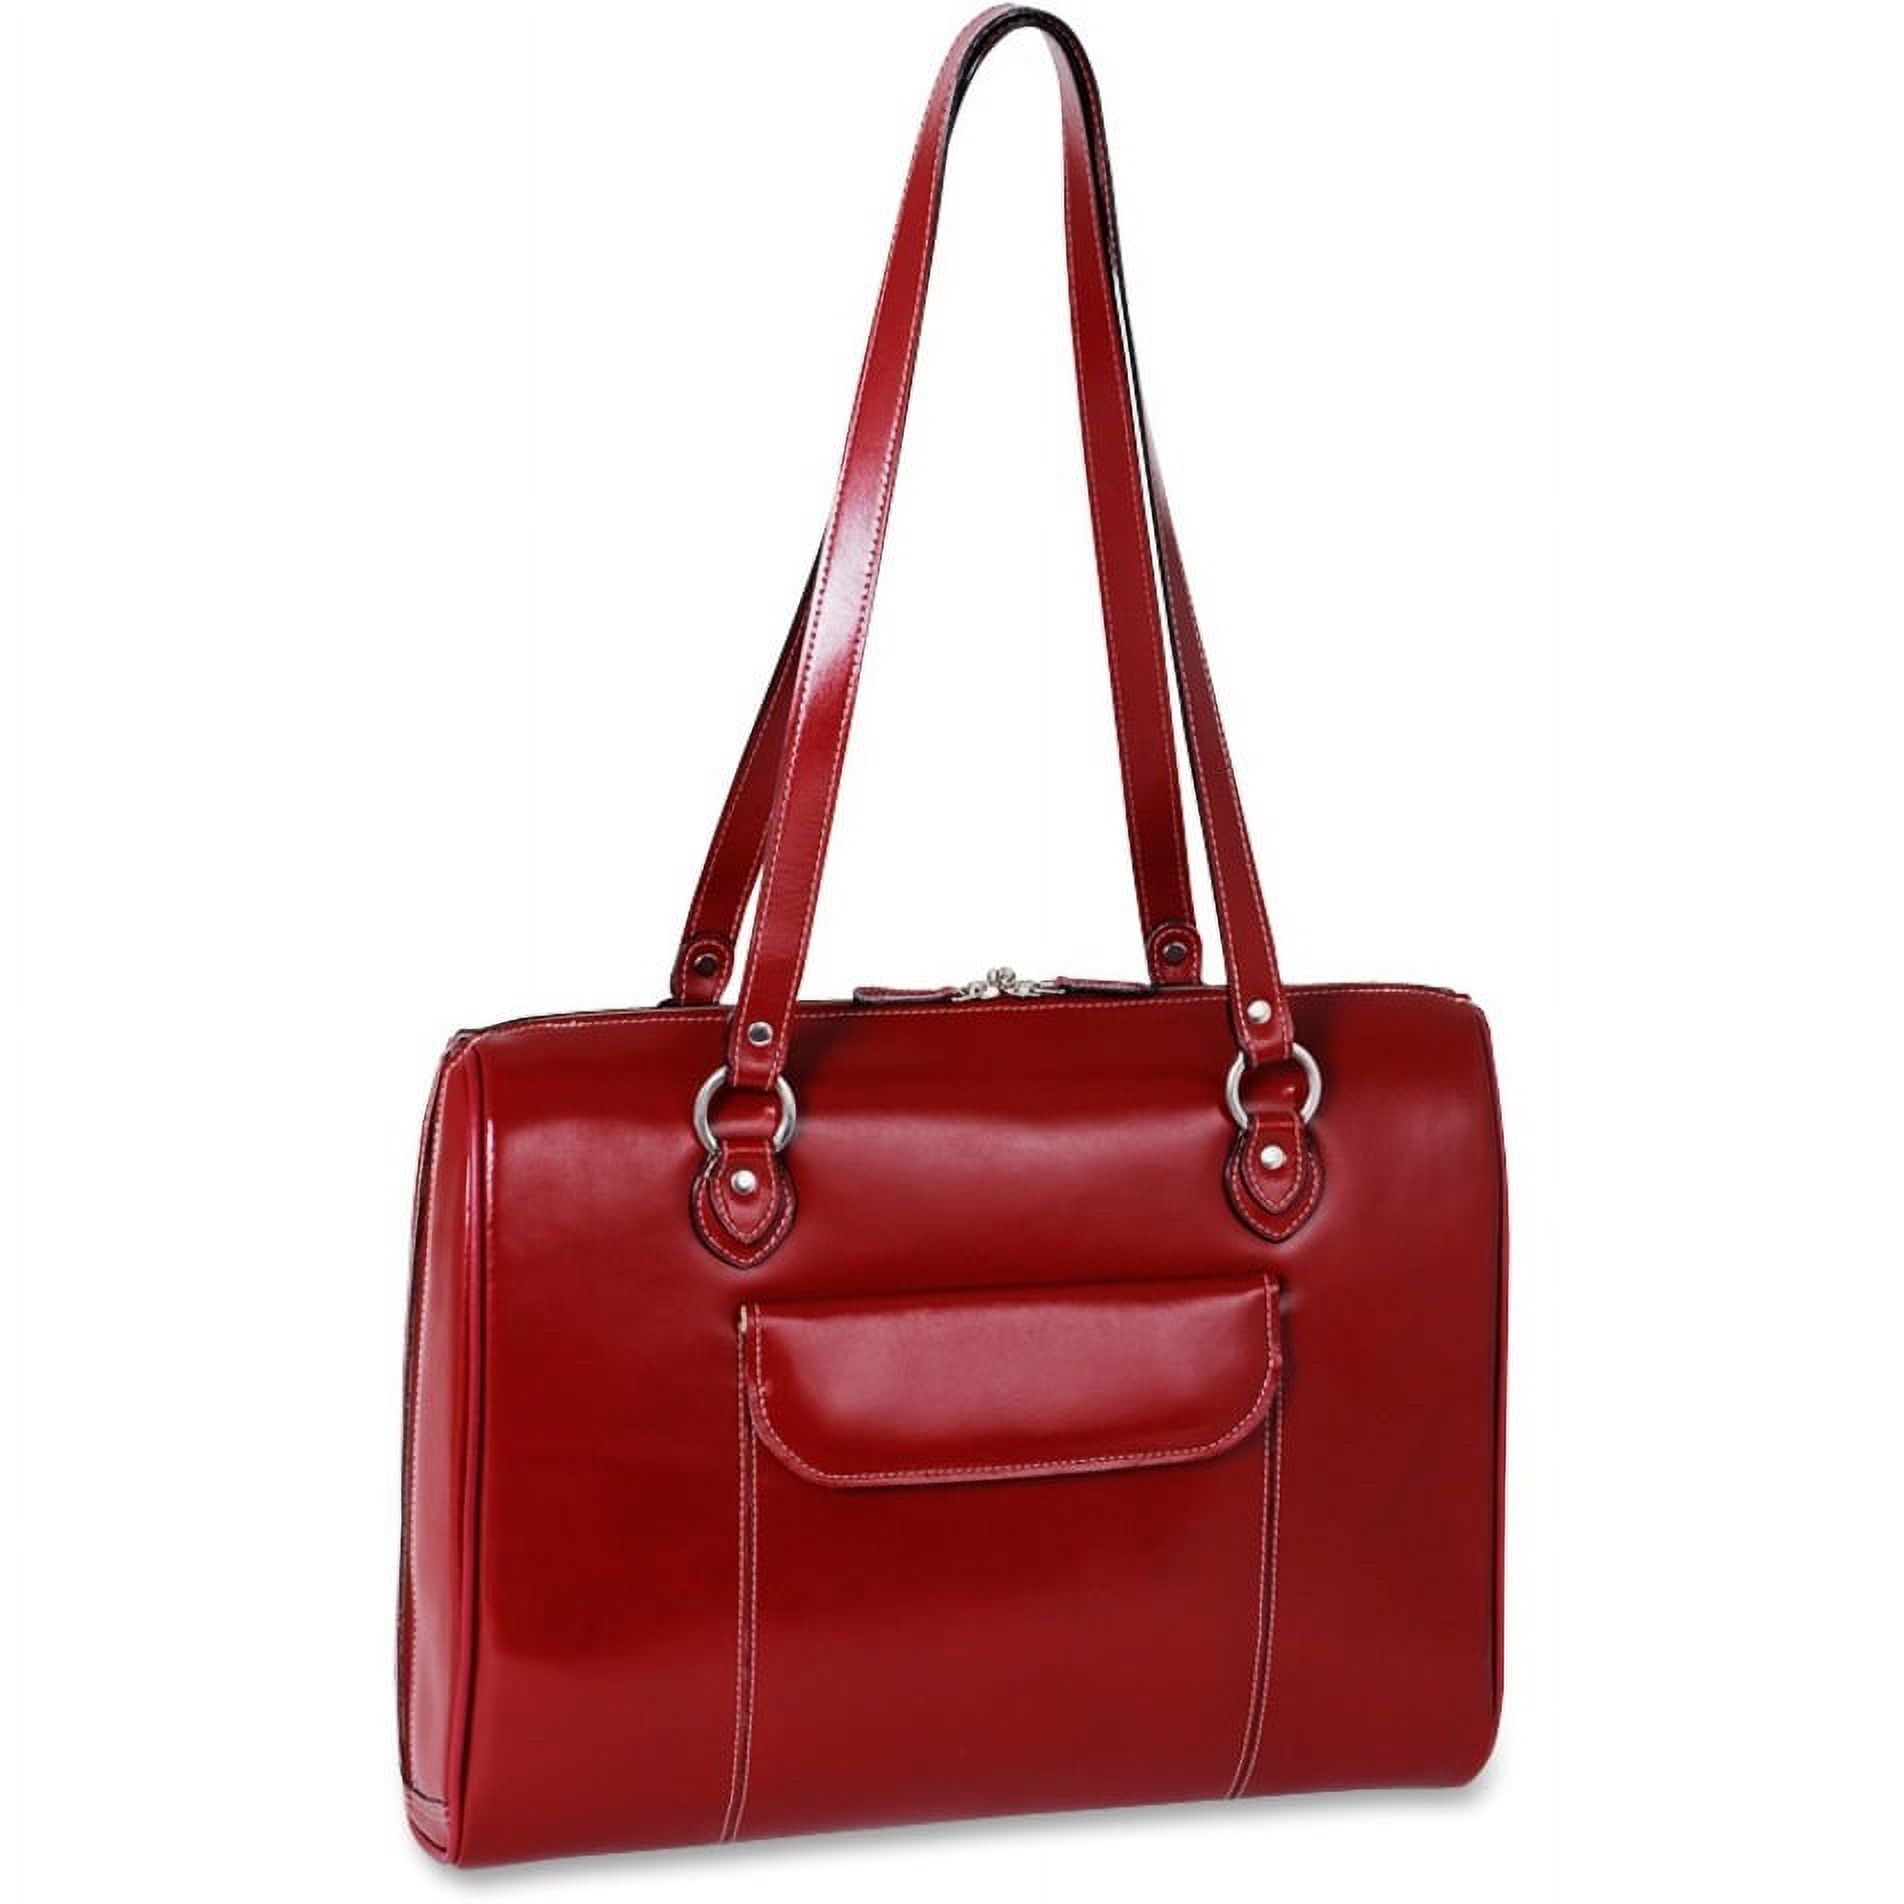 McKlein GLENVIEW, Ladies' Laptop Briefcase, Top Grain Cowhide Leather, Red (94746) - image 1 of 5